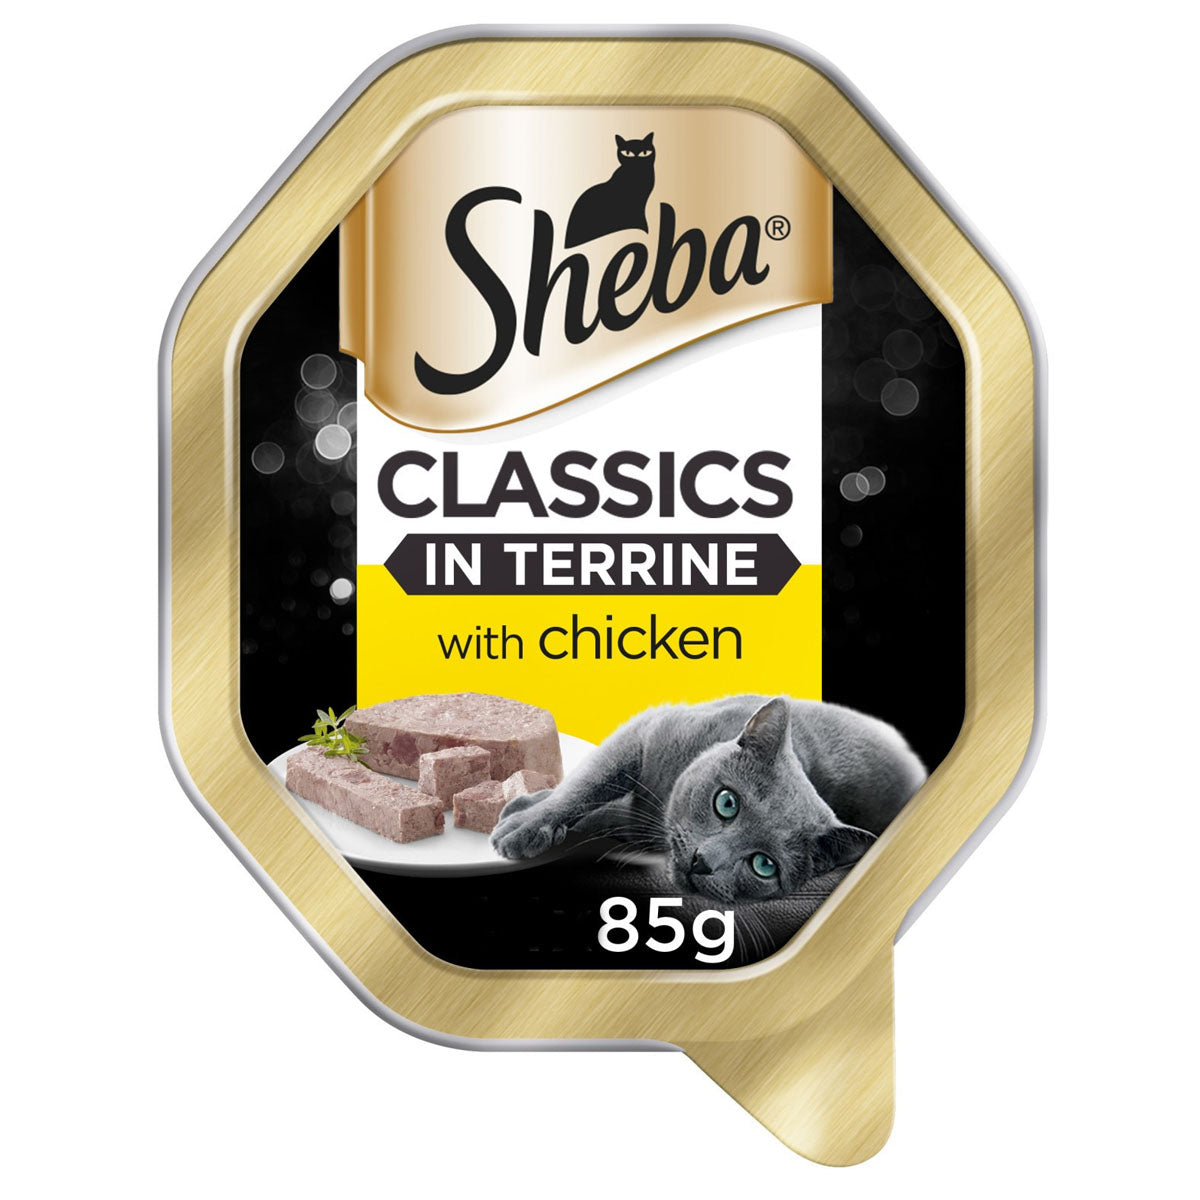 Sheba - Classics Adult Wet Cat Food Trays Chicken in Terrine - 85g - Continental Food Store